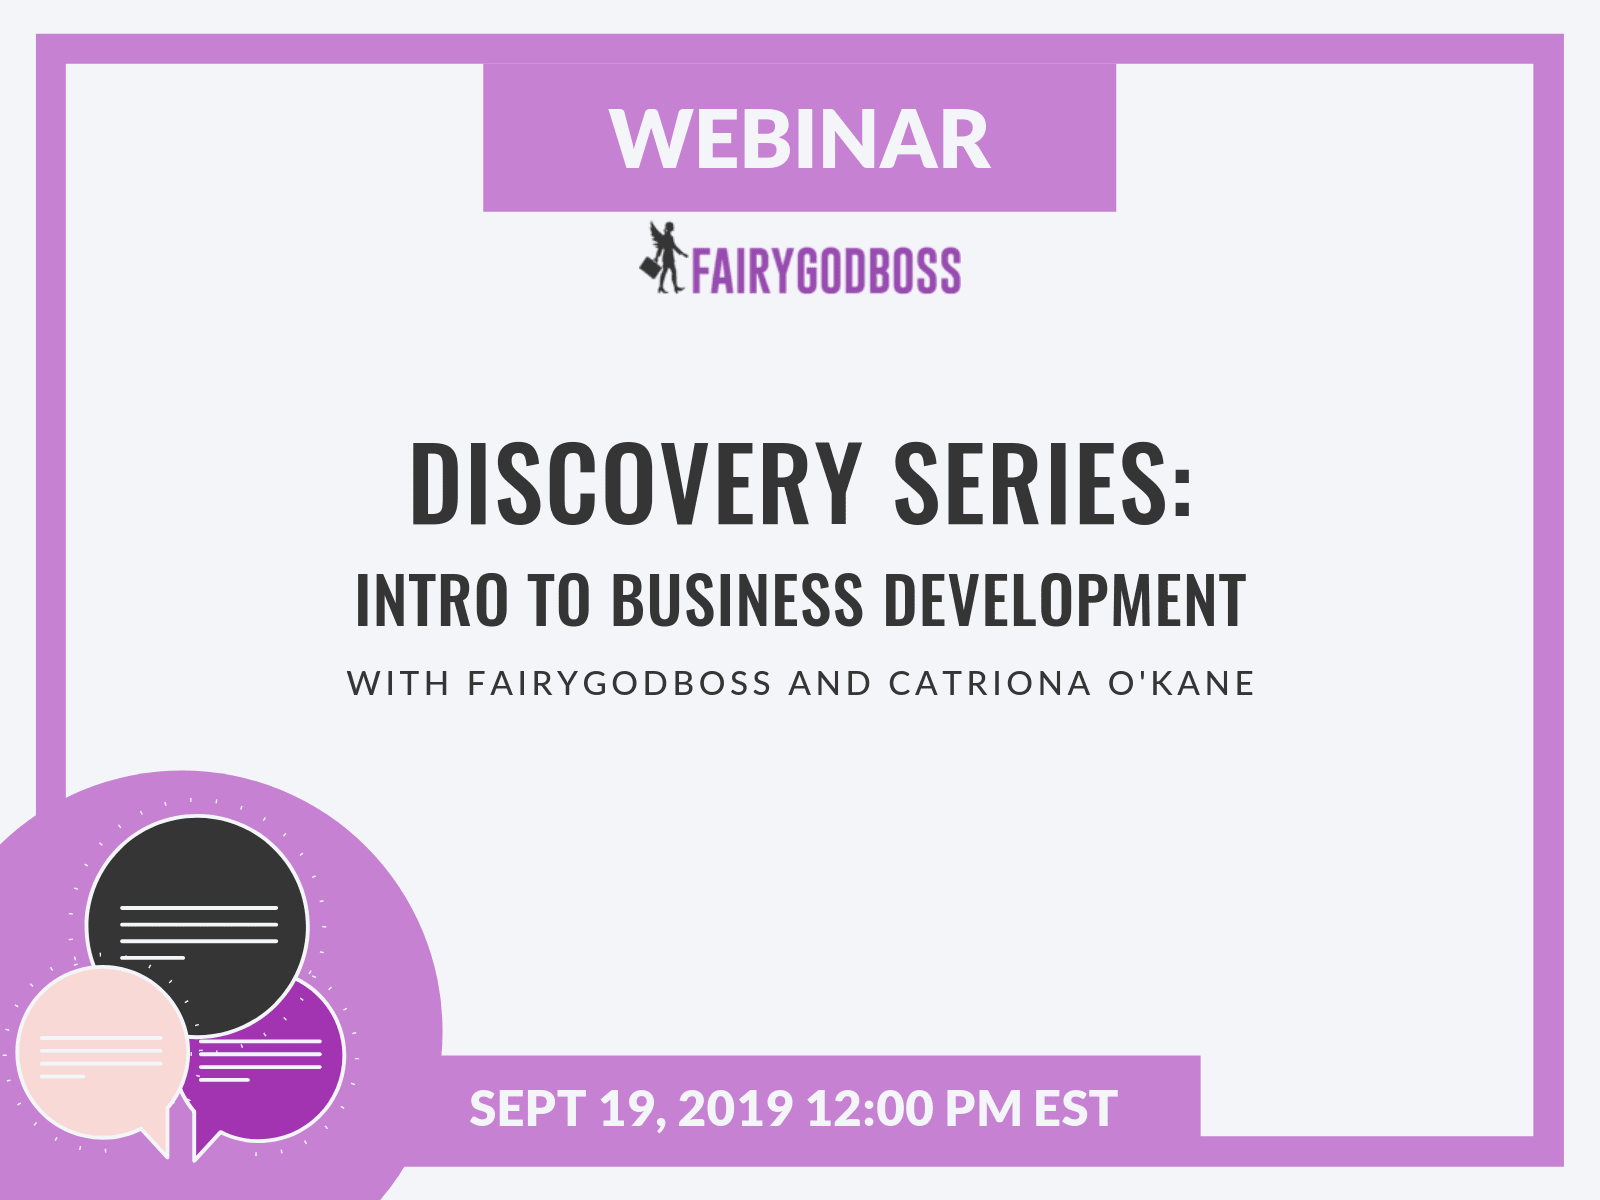 Discovery Series: Intro to Business Development